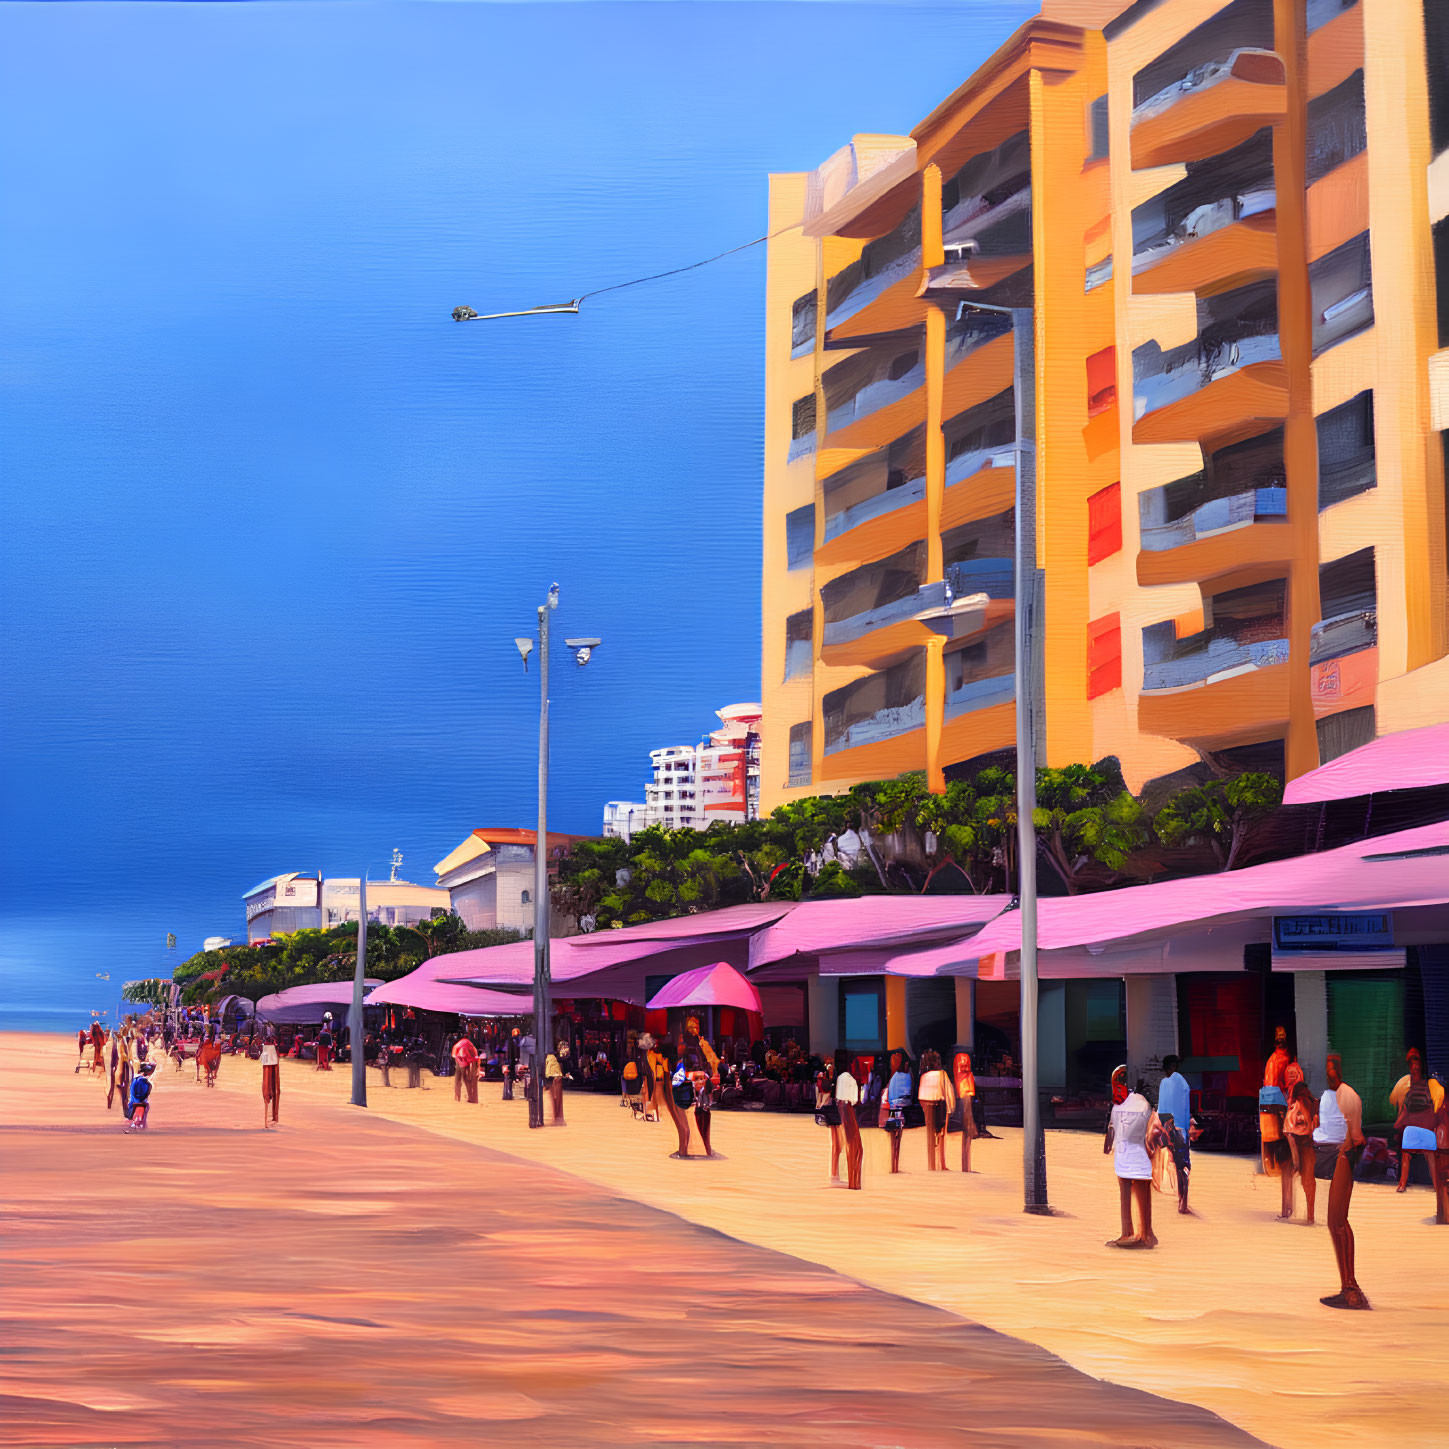 Busy seaside promenade with people, umbrellas, and high-rise building